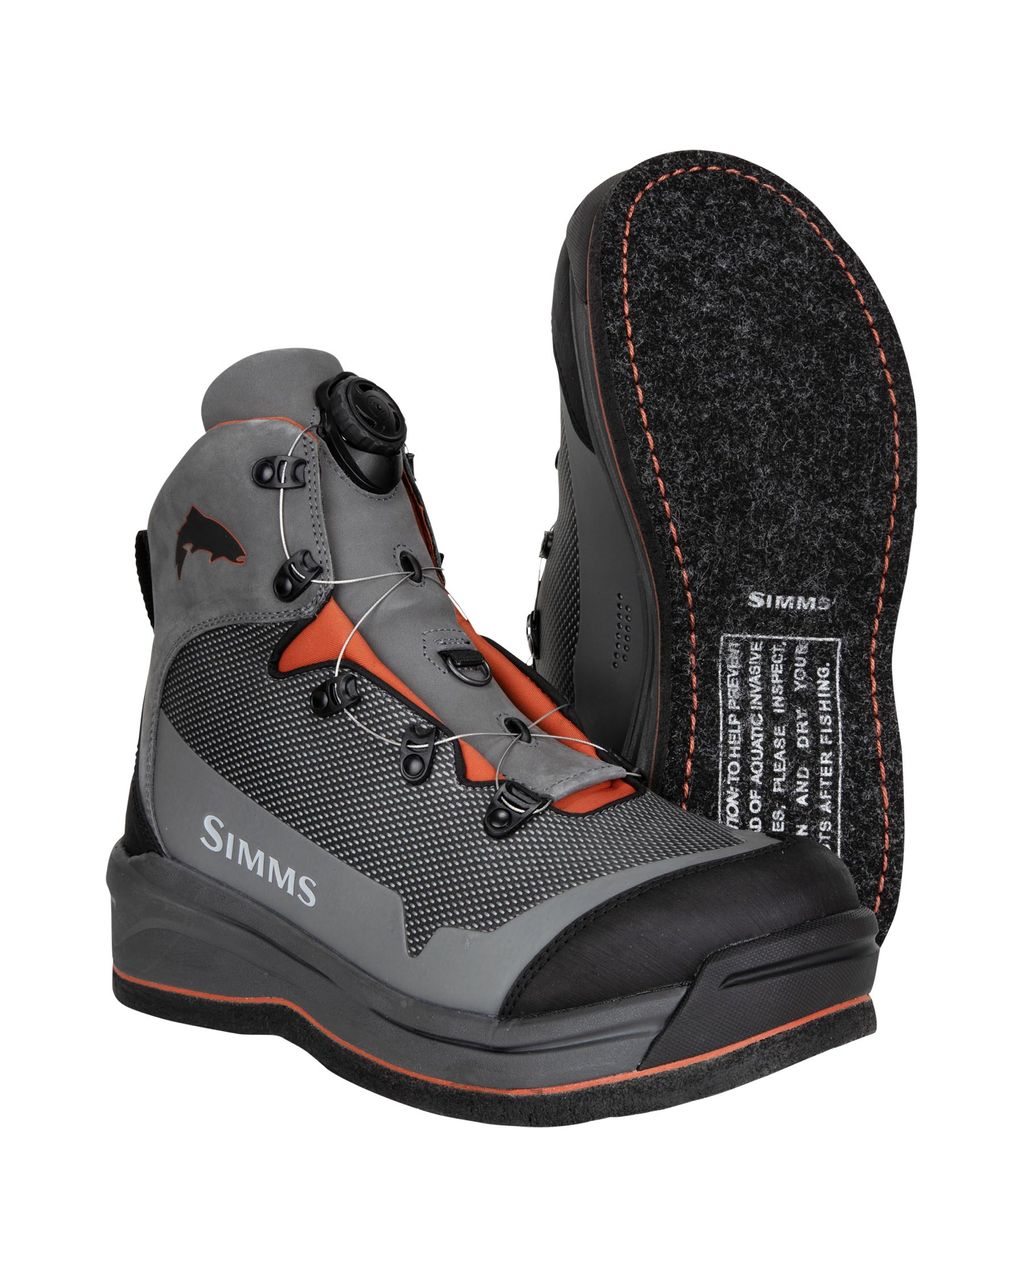 Simms M's Guide BOA Wading Boot - Felt - Size 13